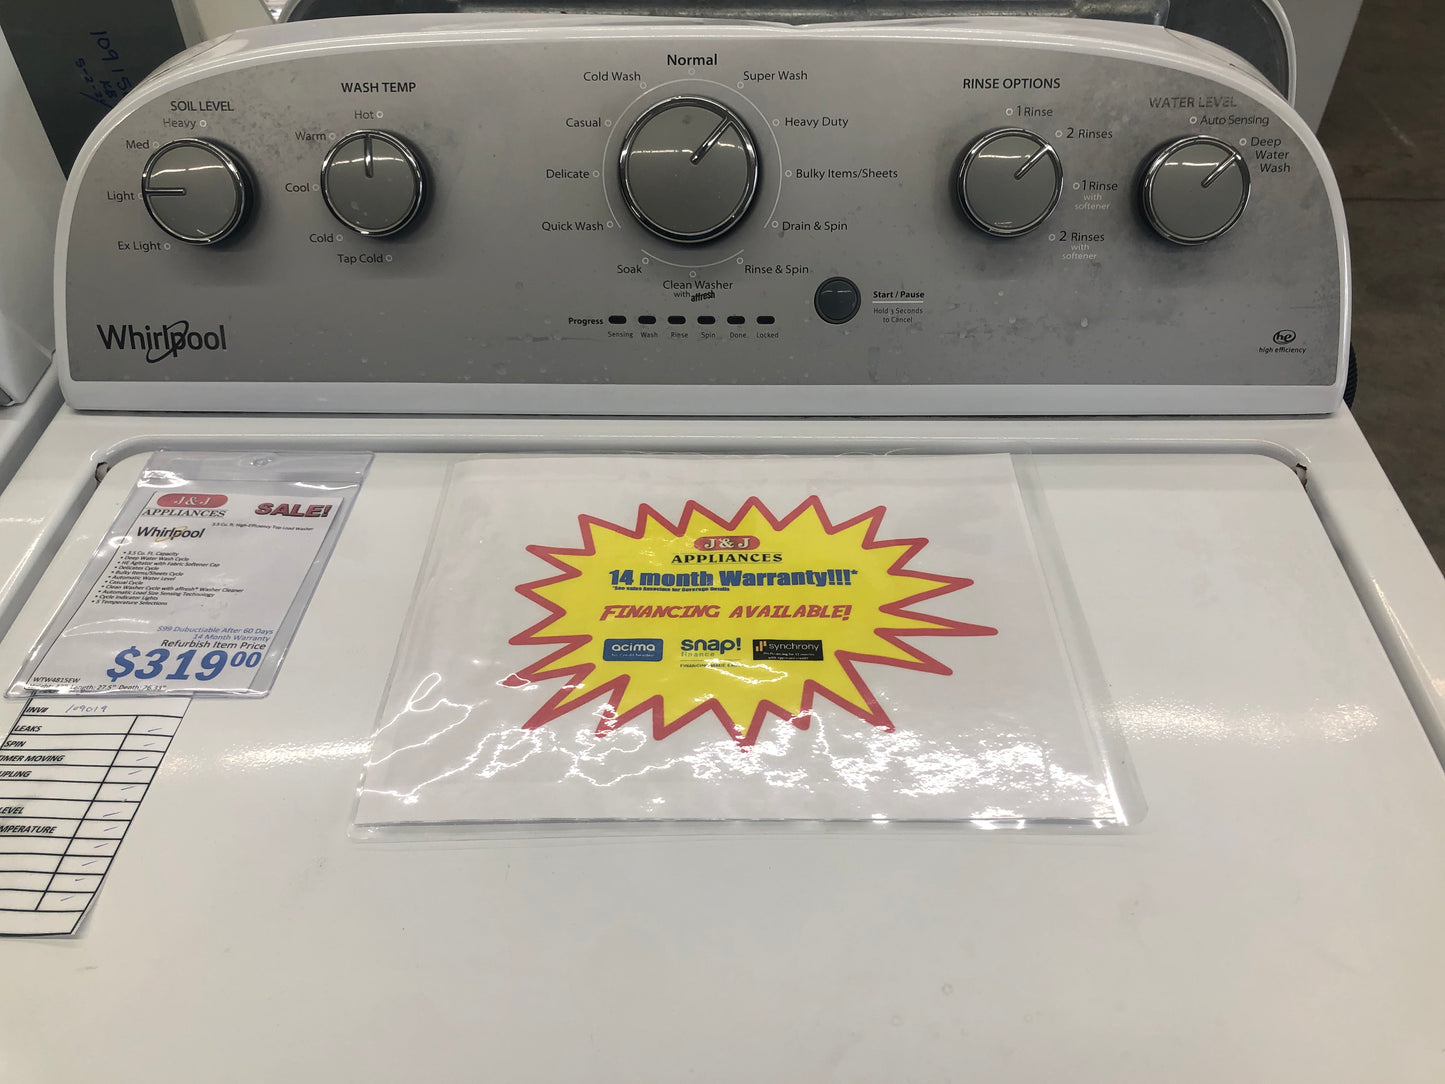 Whirlpool 3.5 cu ft Top Load Washer